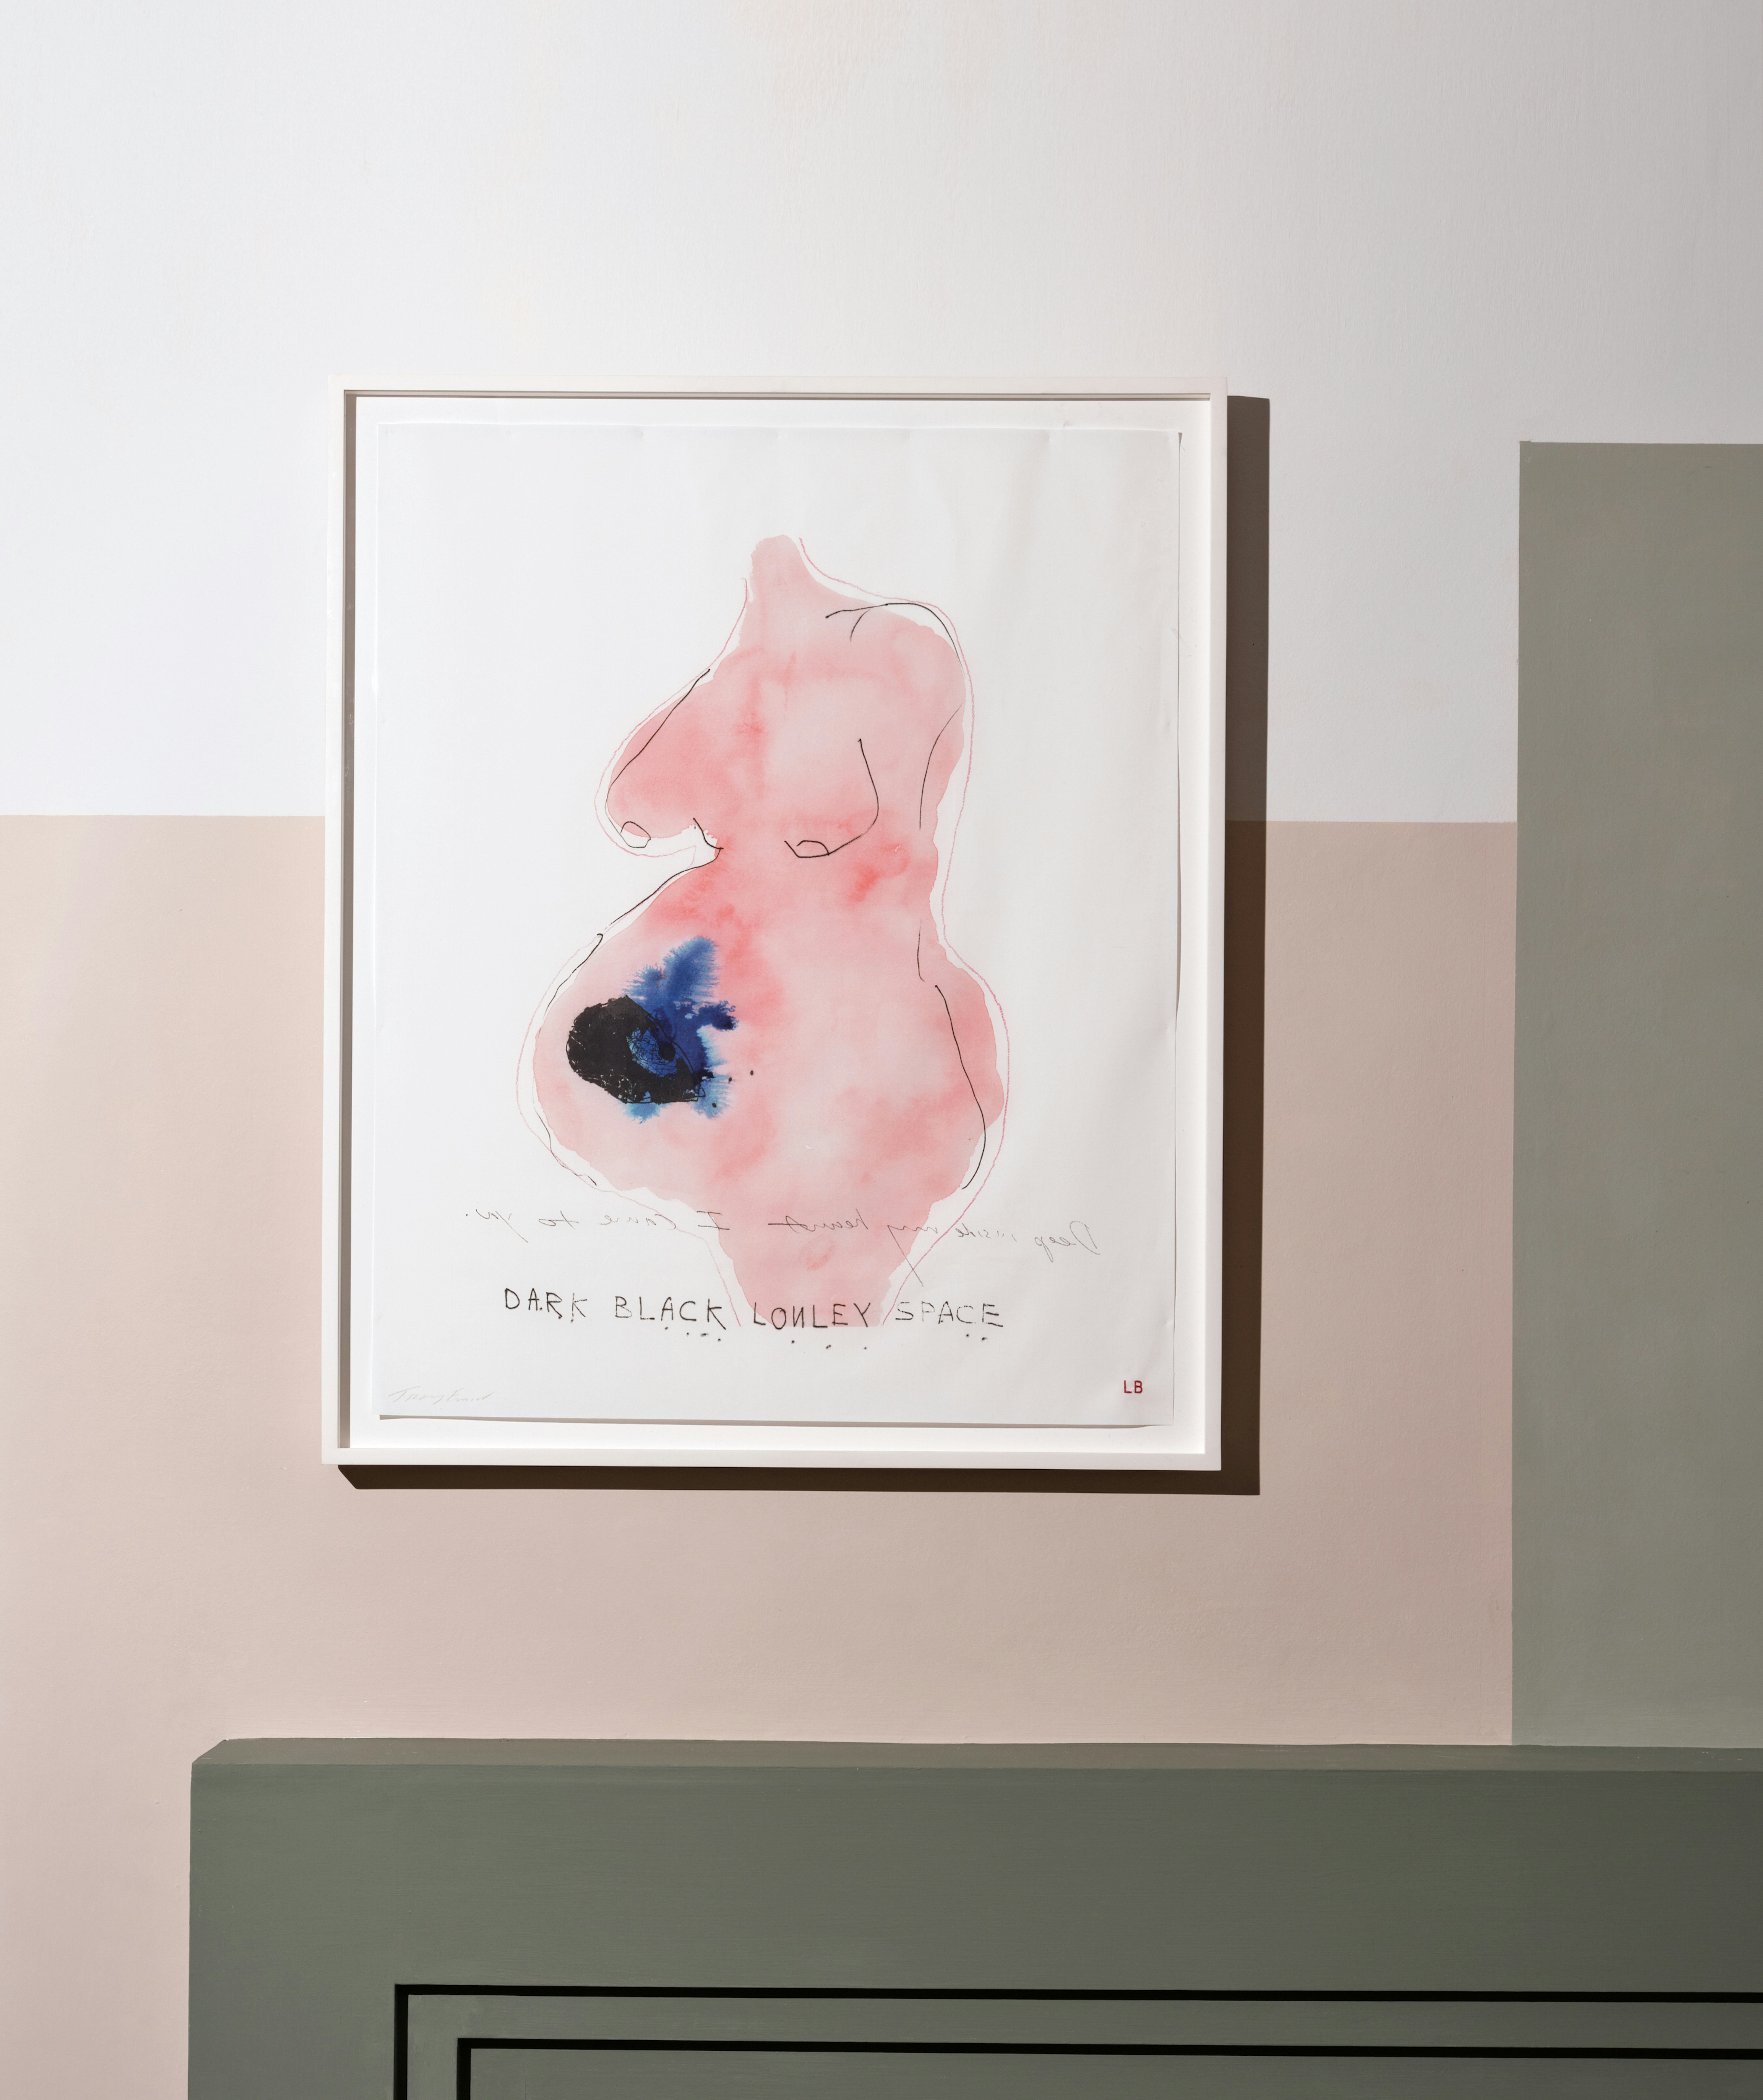 Installation photo of digital print in colours by Louise Bourgeois and Tracey Emin depicting image of pregnant nude female torso in profile with blue wash drawing on the womb and text additions by Emin.